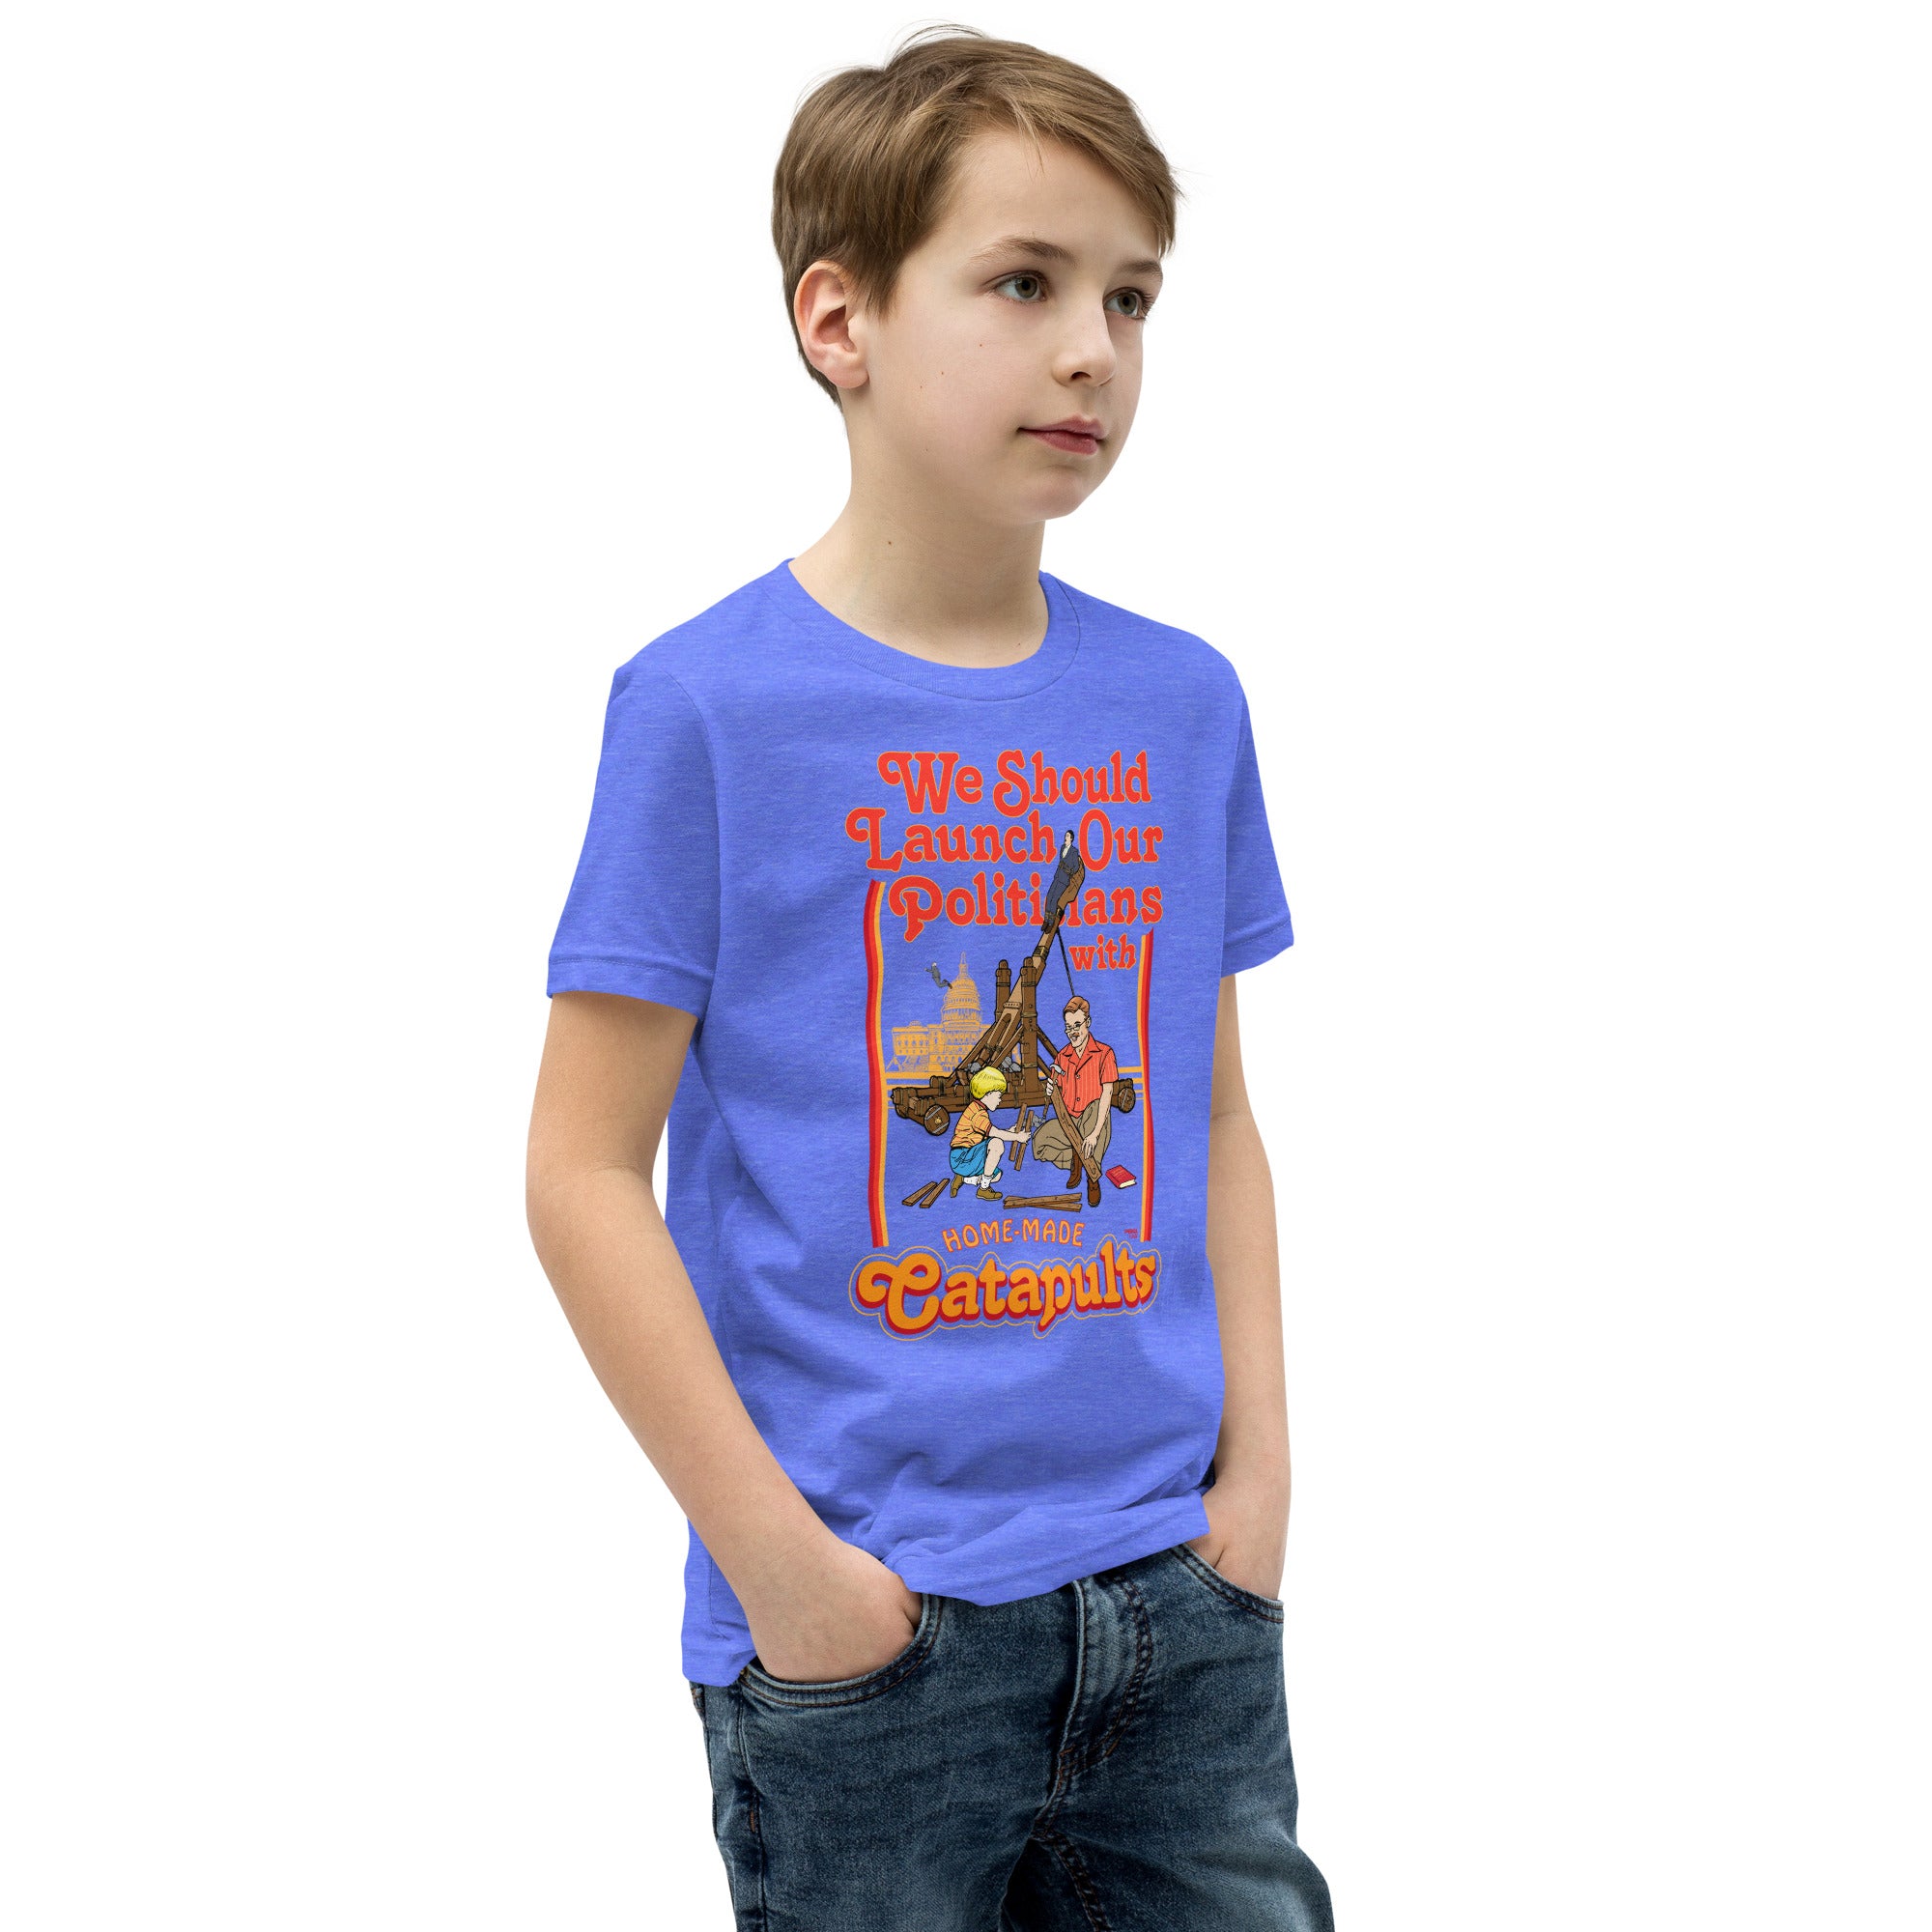 We Should Launch Politicians from Catapults Youth Short Sleeve T-Shirt